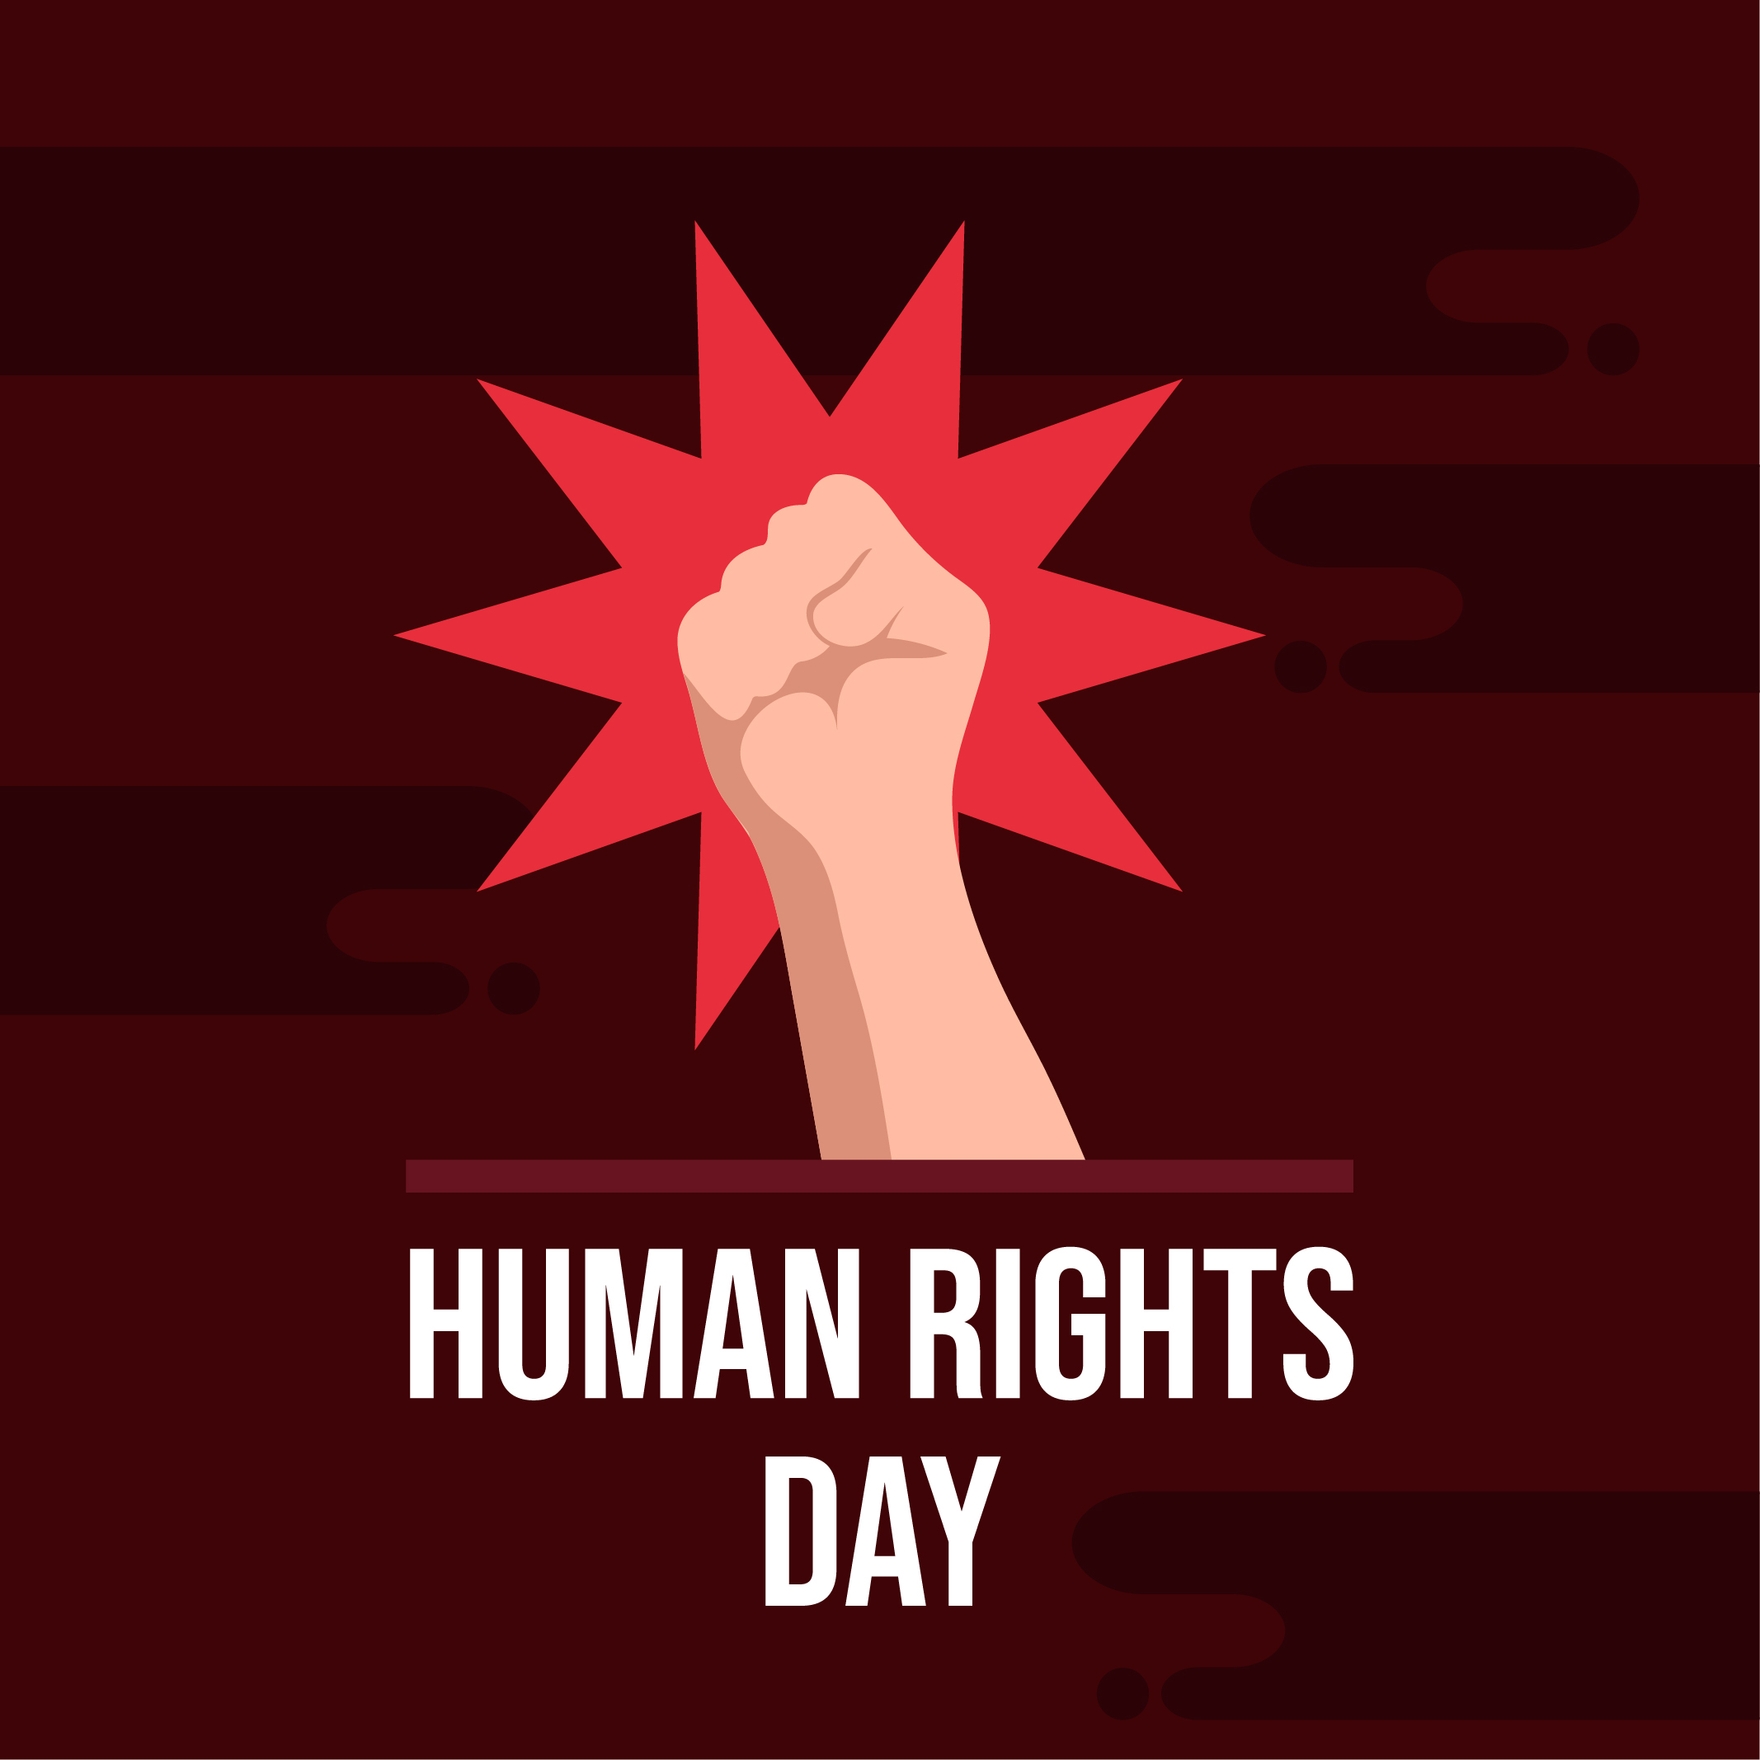 Free Human Rights Day Vector in Illustrator, PSD, EPS, SVG, JPG, PNG